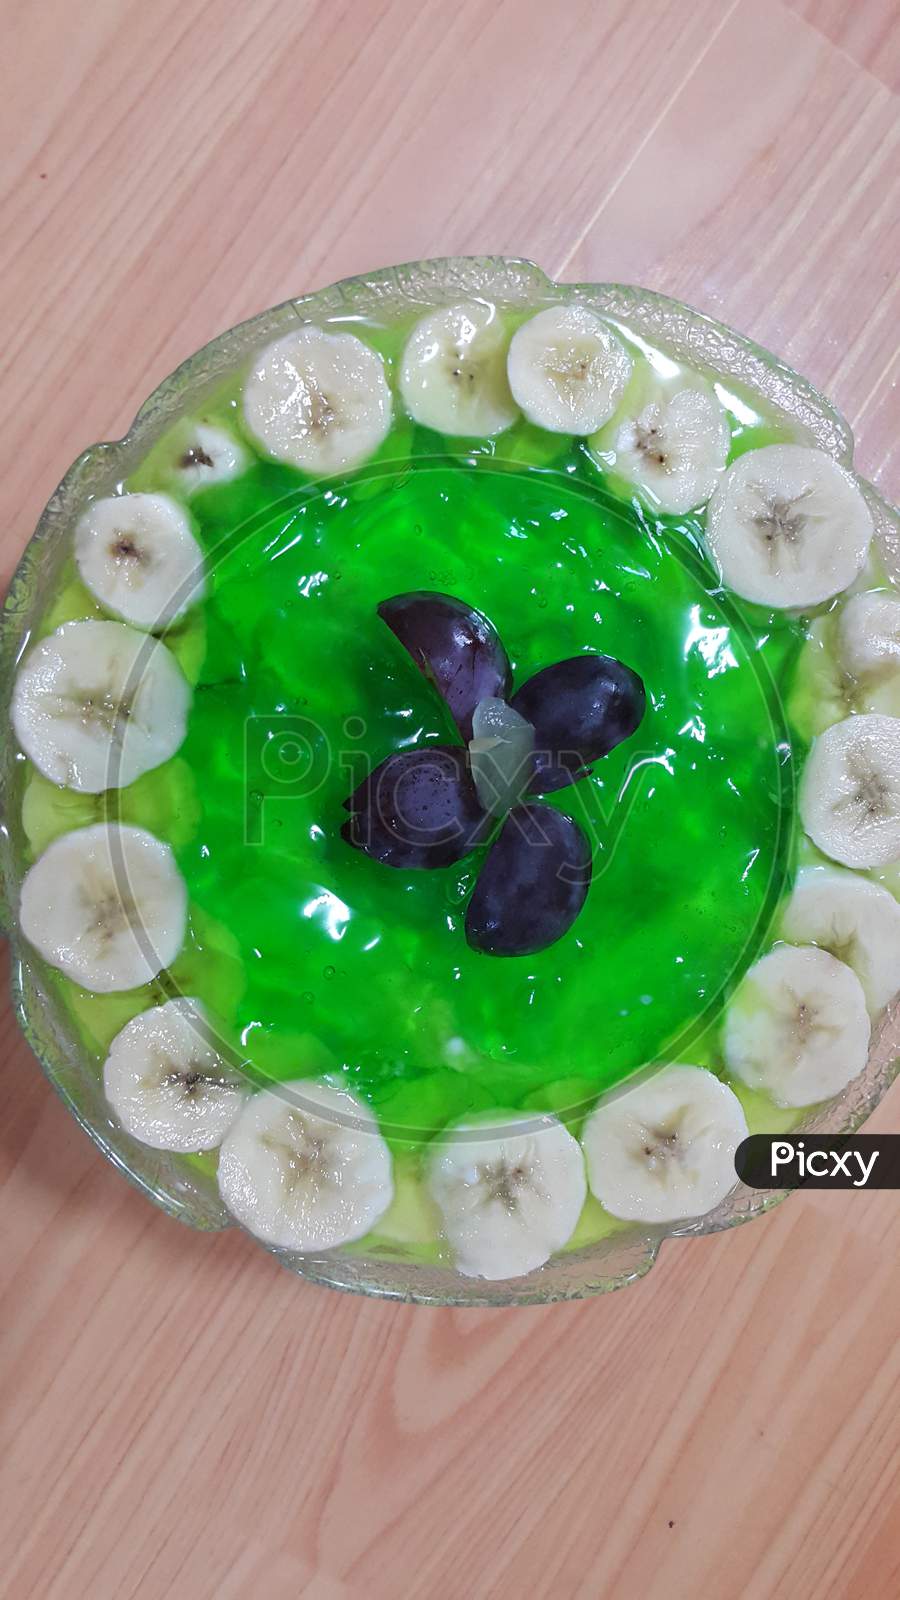 Creamy Tasty Sweet Green Jelly With Banana Slices Layered On Surface